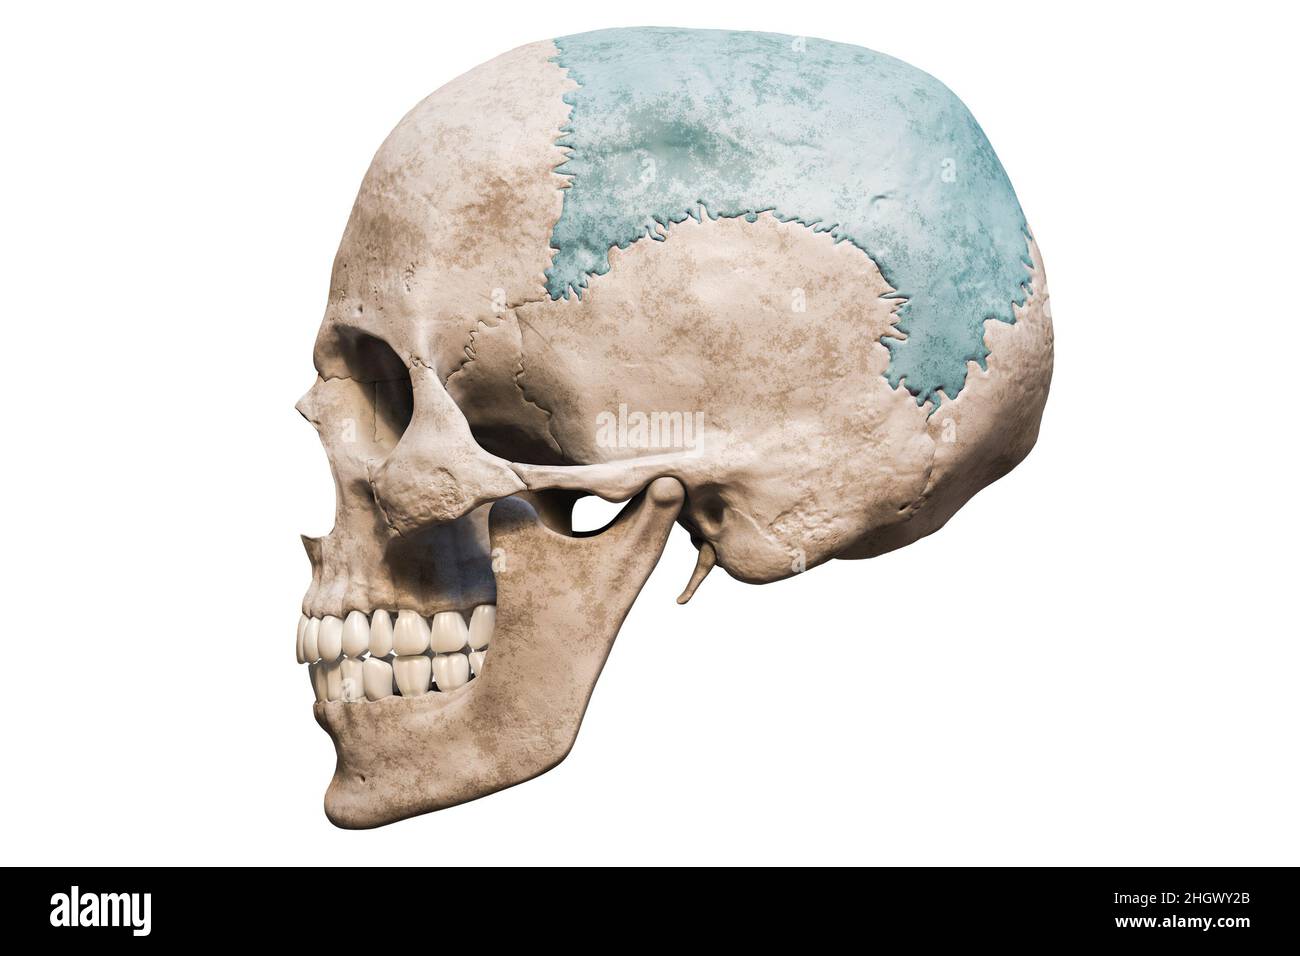 Anatomically accurate human male skull with colorized parietal bone lateral or profile view isolated on white background with copy space 3D rendering Stock Photo